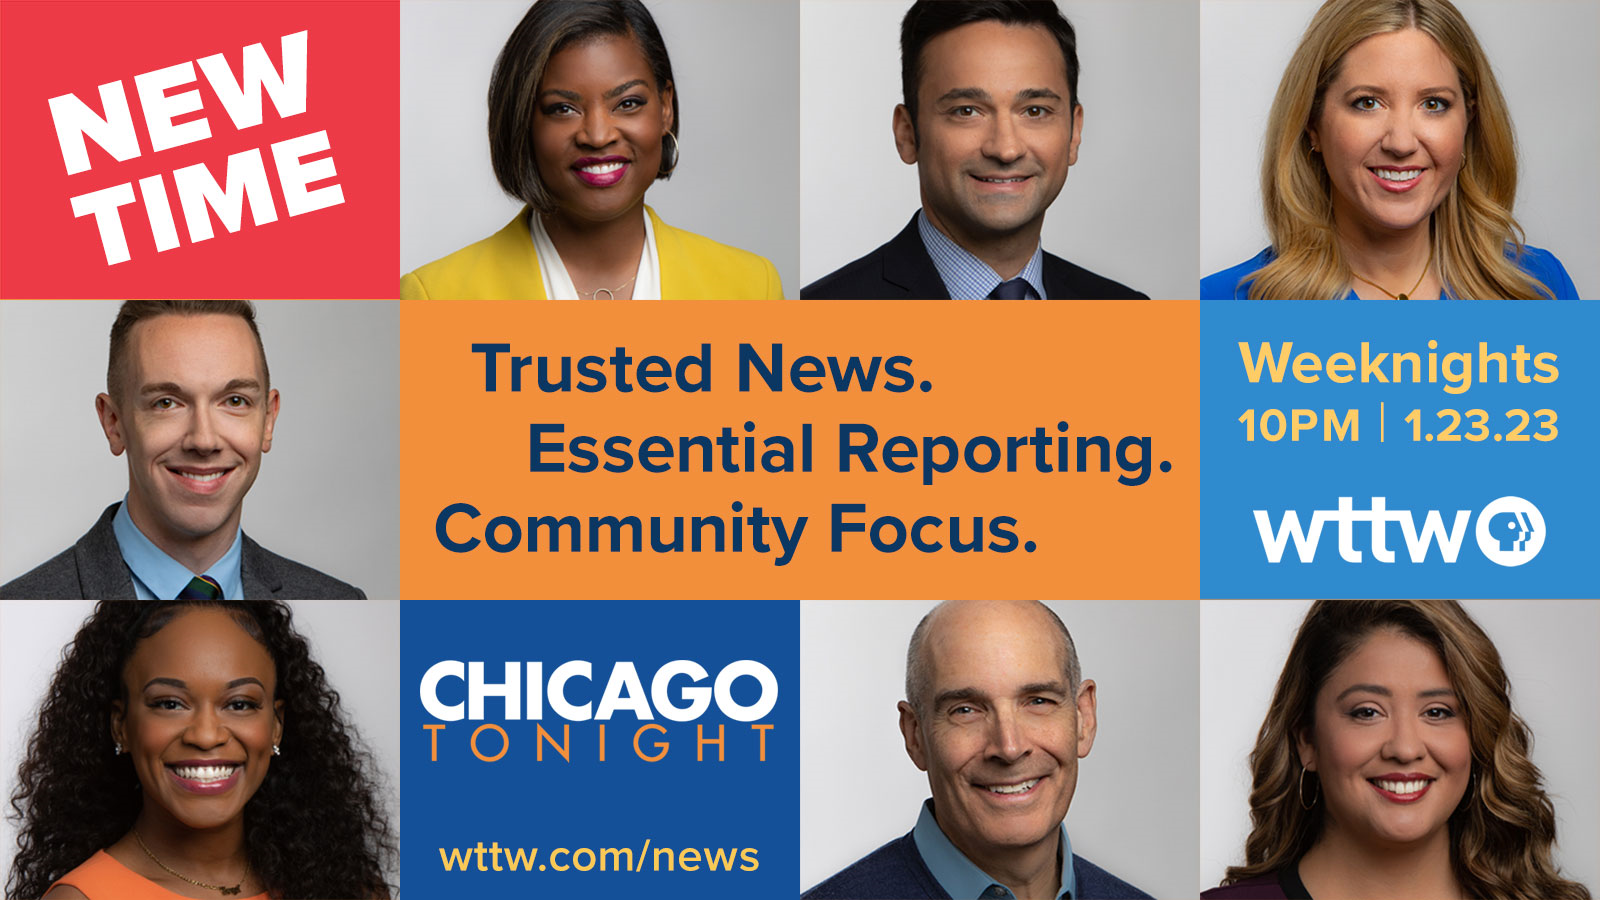 Major Change to WTTW's Chicago Tonight and Other Chicago Media News